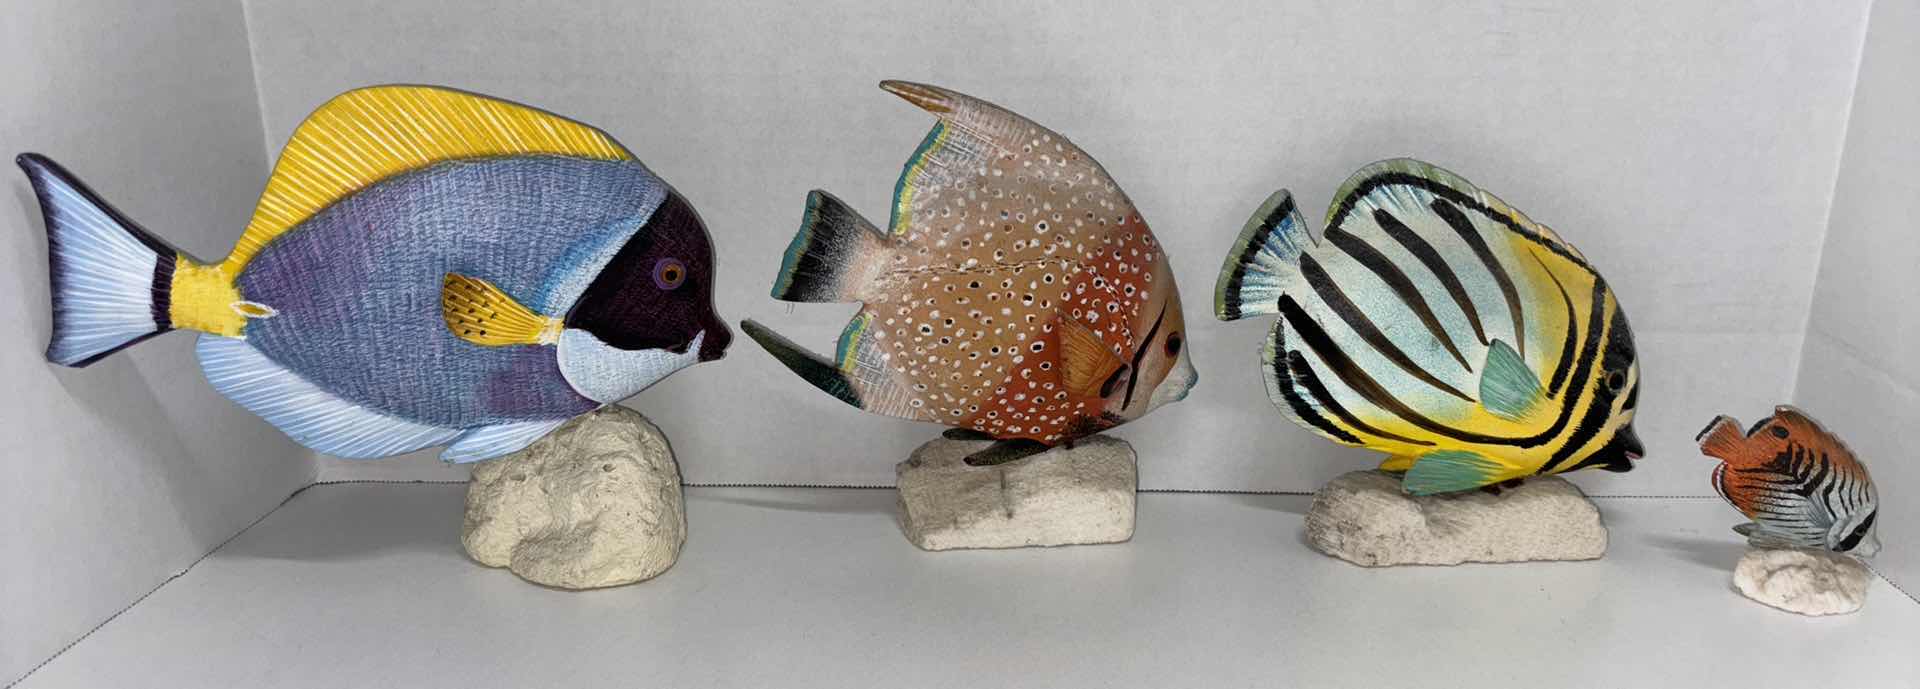 Photo 2 of NAUTICAL CARVED WOOD & HAND-PAINTED FISH FIGURINE DECOR